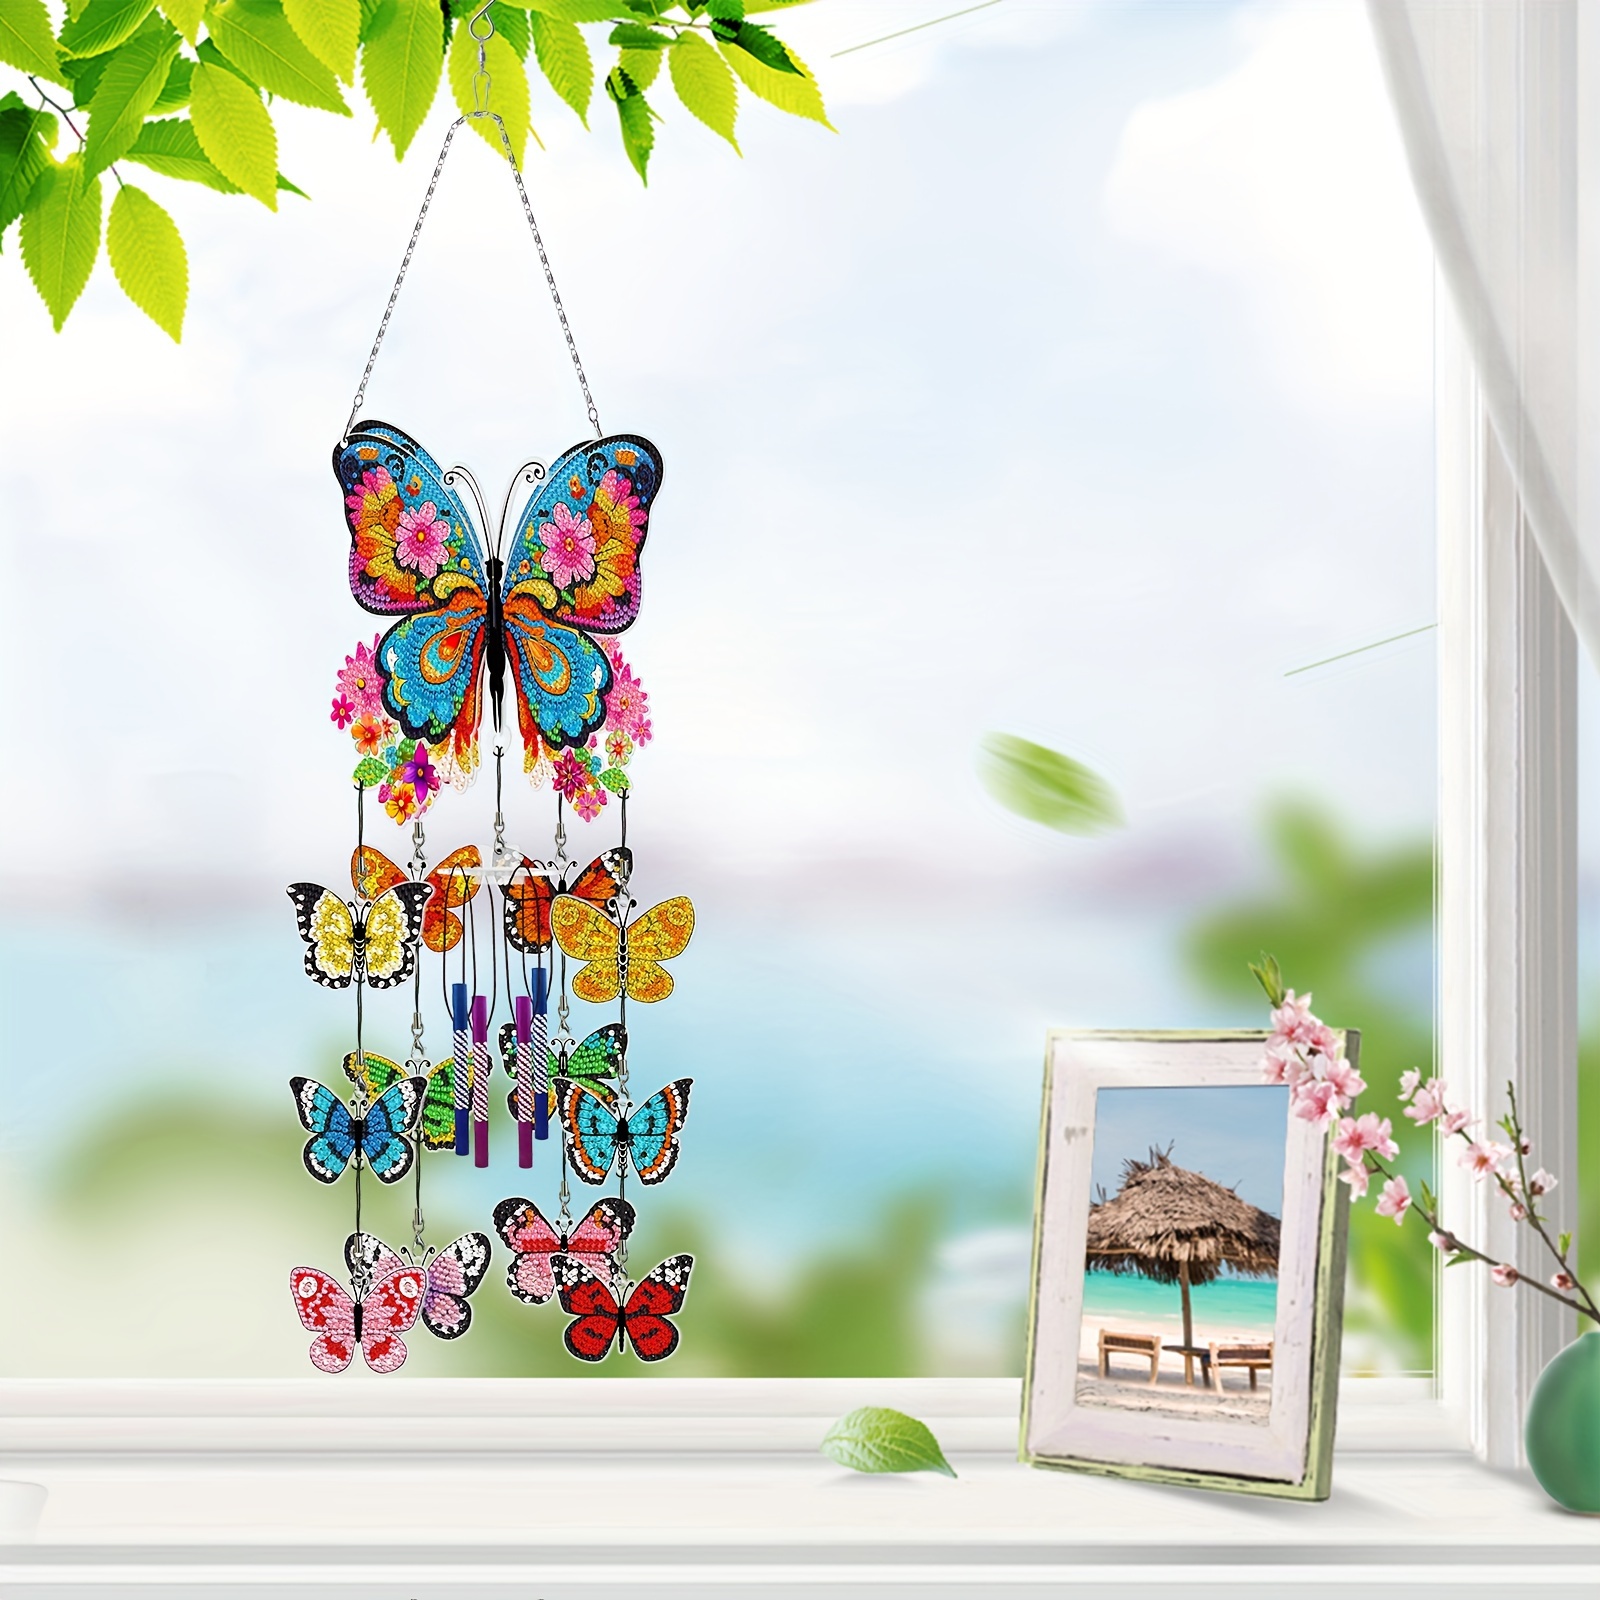 

1pc Handmade Diy Acrylic Butterfly Series Wind Chime Tag Suitable For Balcony Window Room Hanging Ornament Decoration, Decoration Exquisite Gift For Friends Family